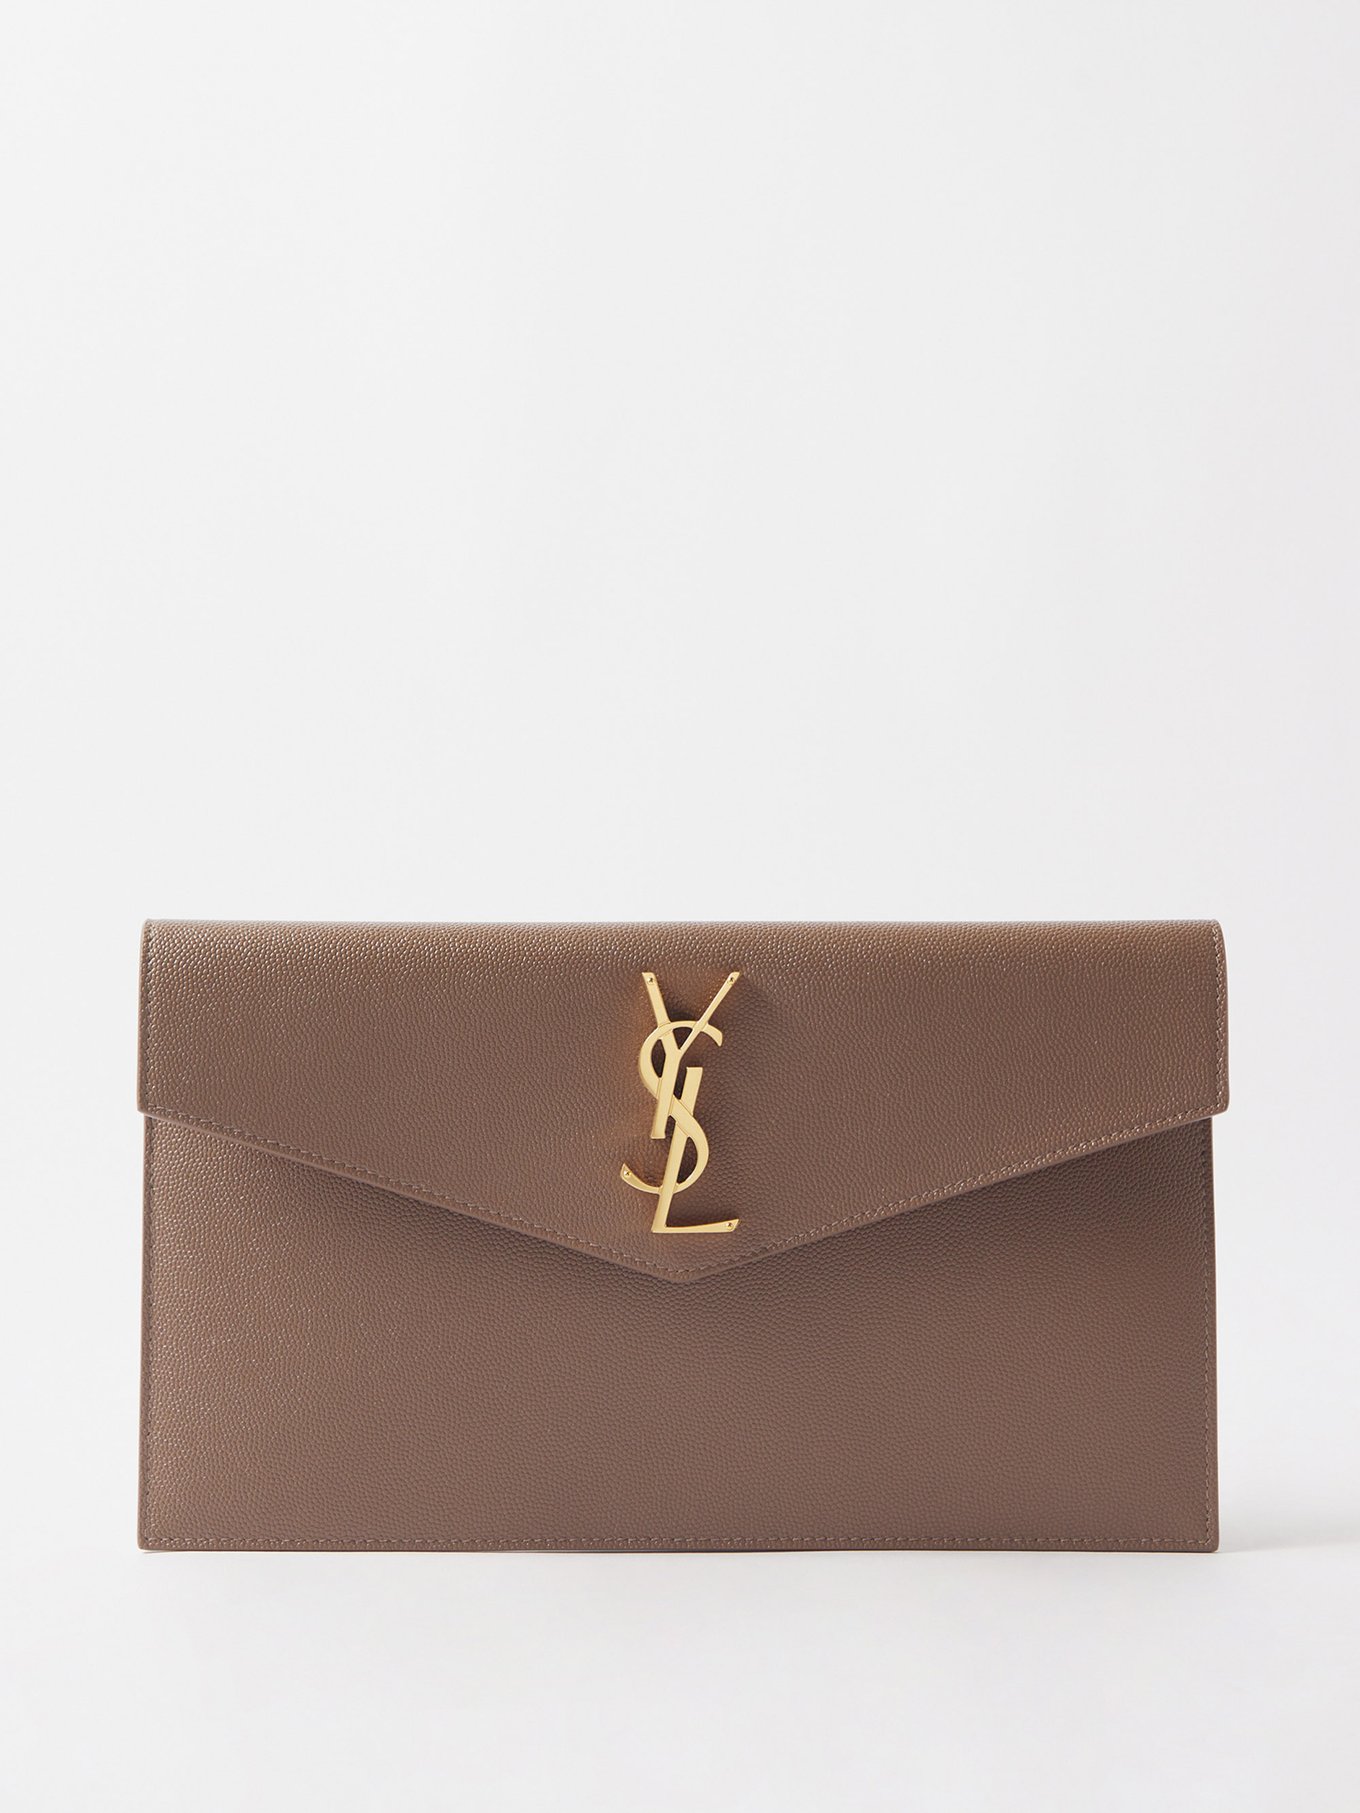 White Uptown YSL-plaque grained-leather clutch bag